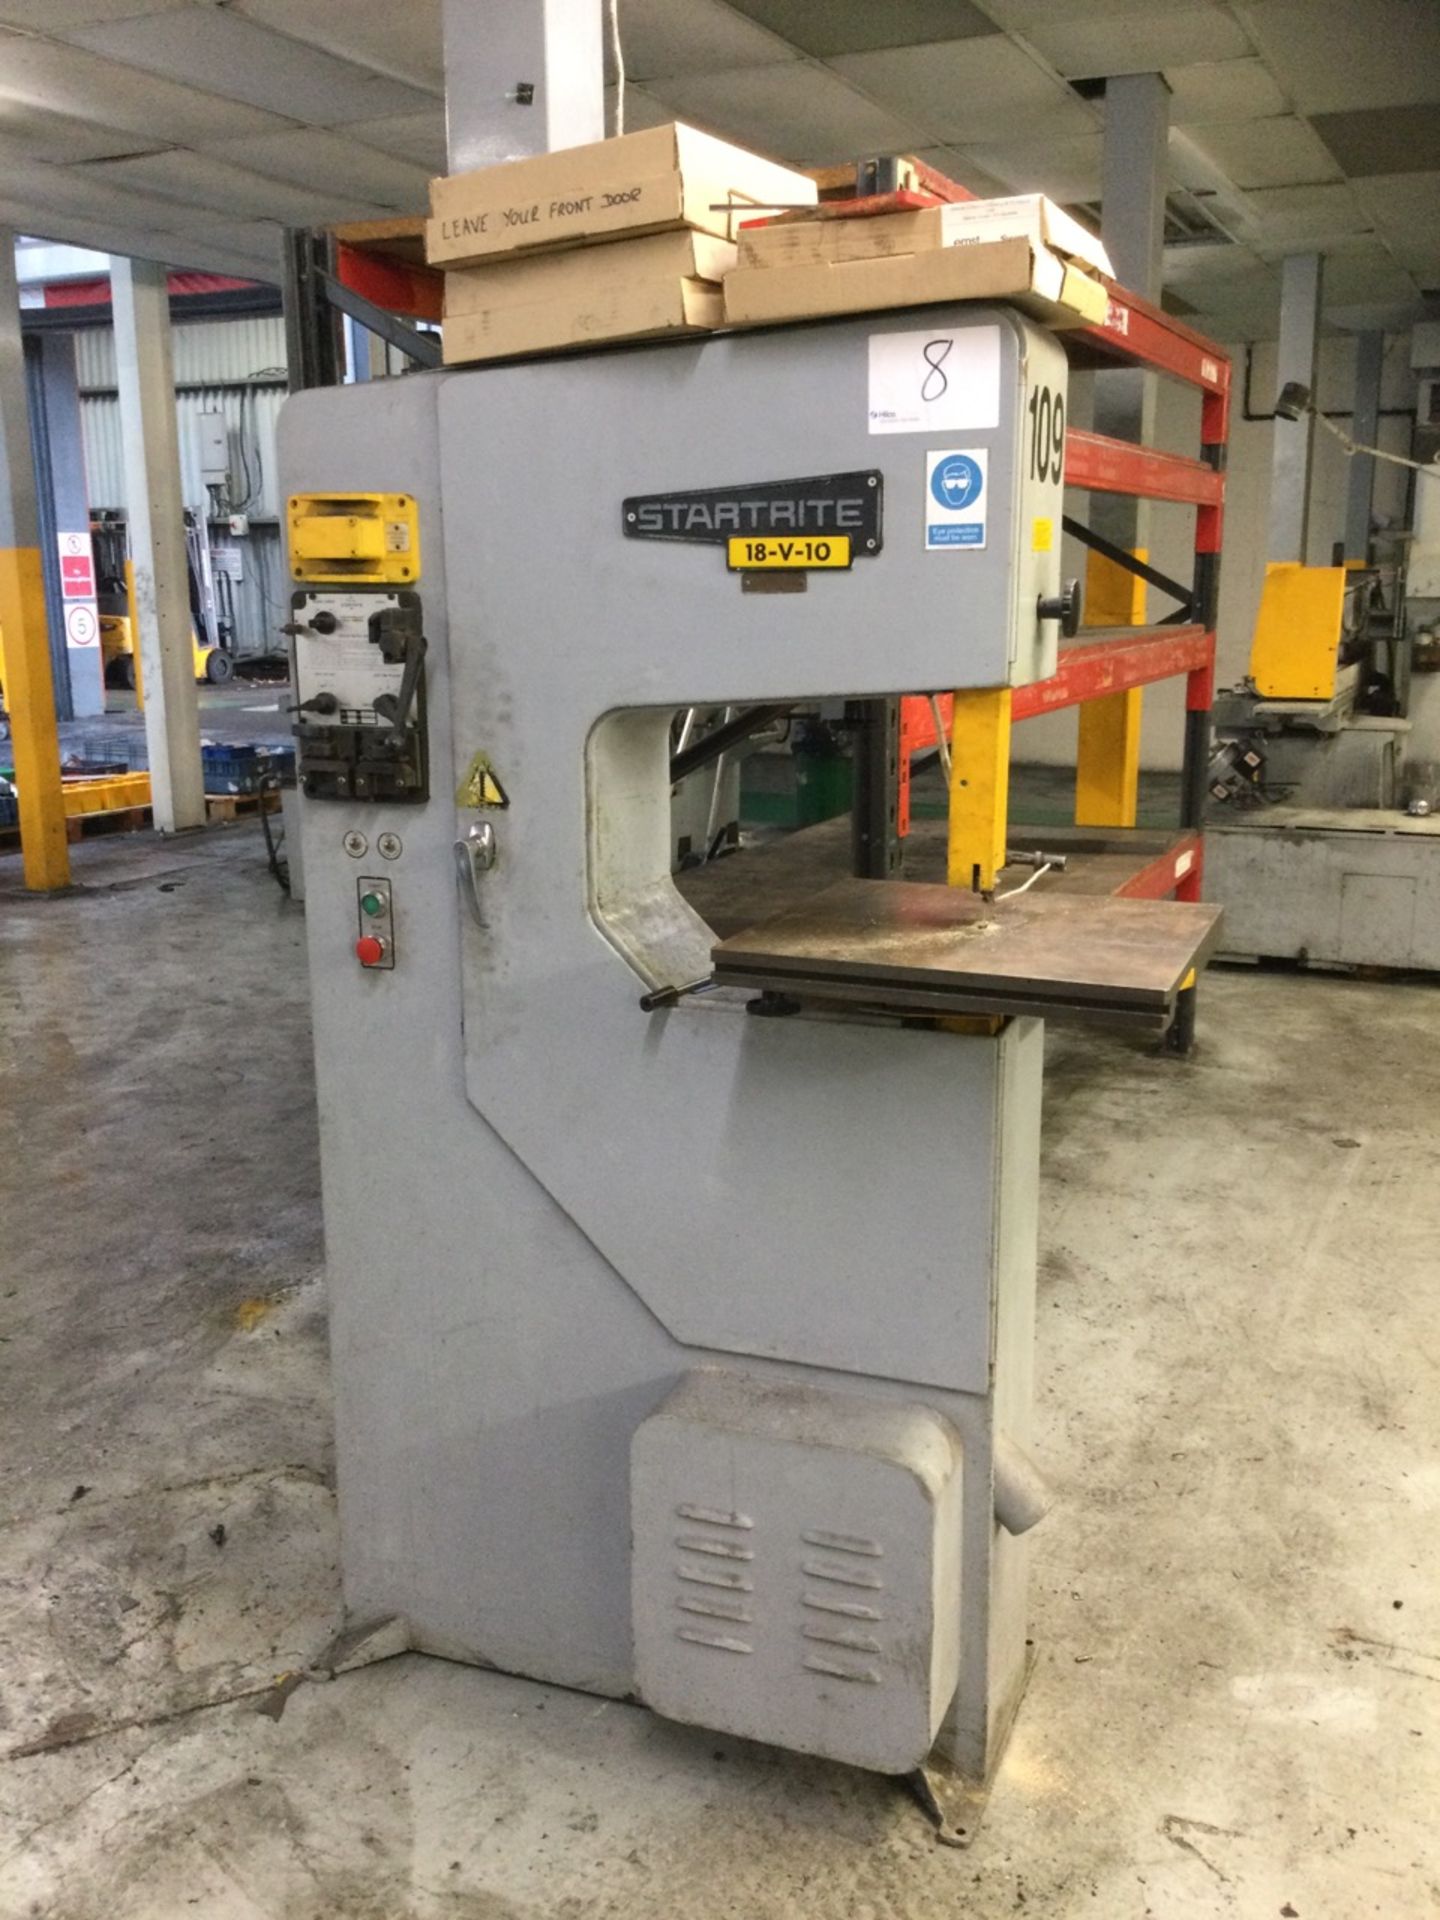 1 Startrite, 18-V-10, Vertical bandsaw, 18" throat with a blade welding and grinding attachment, Ser